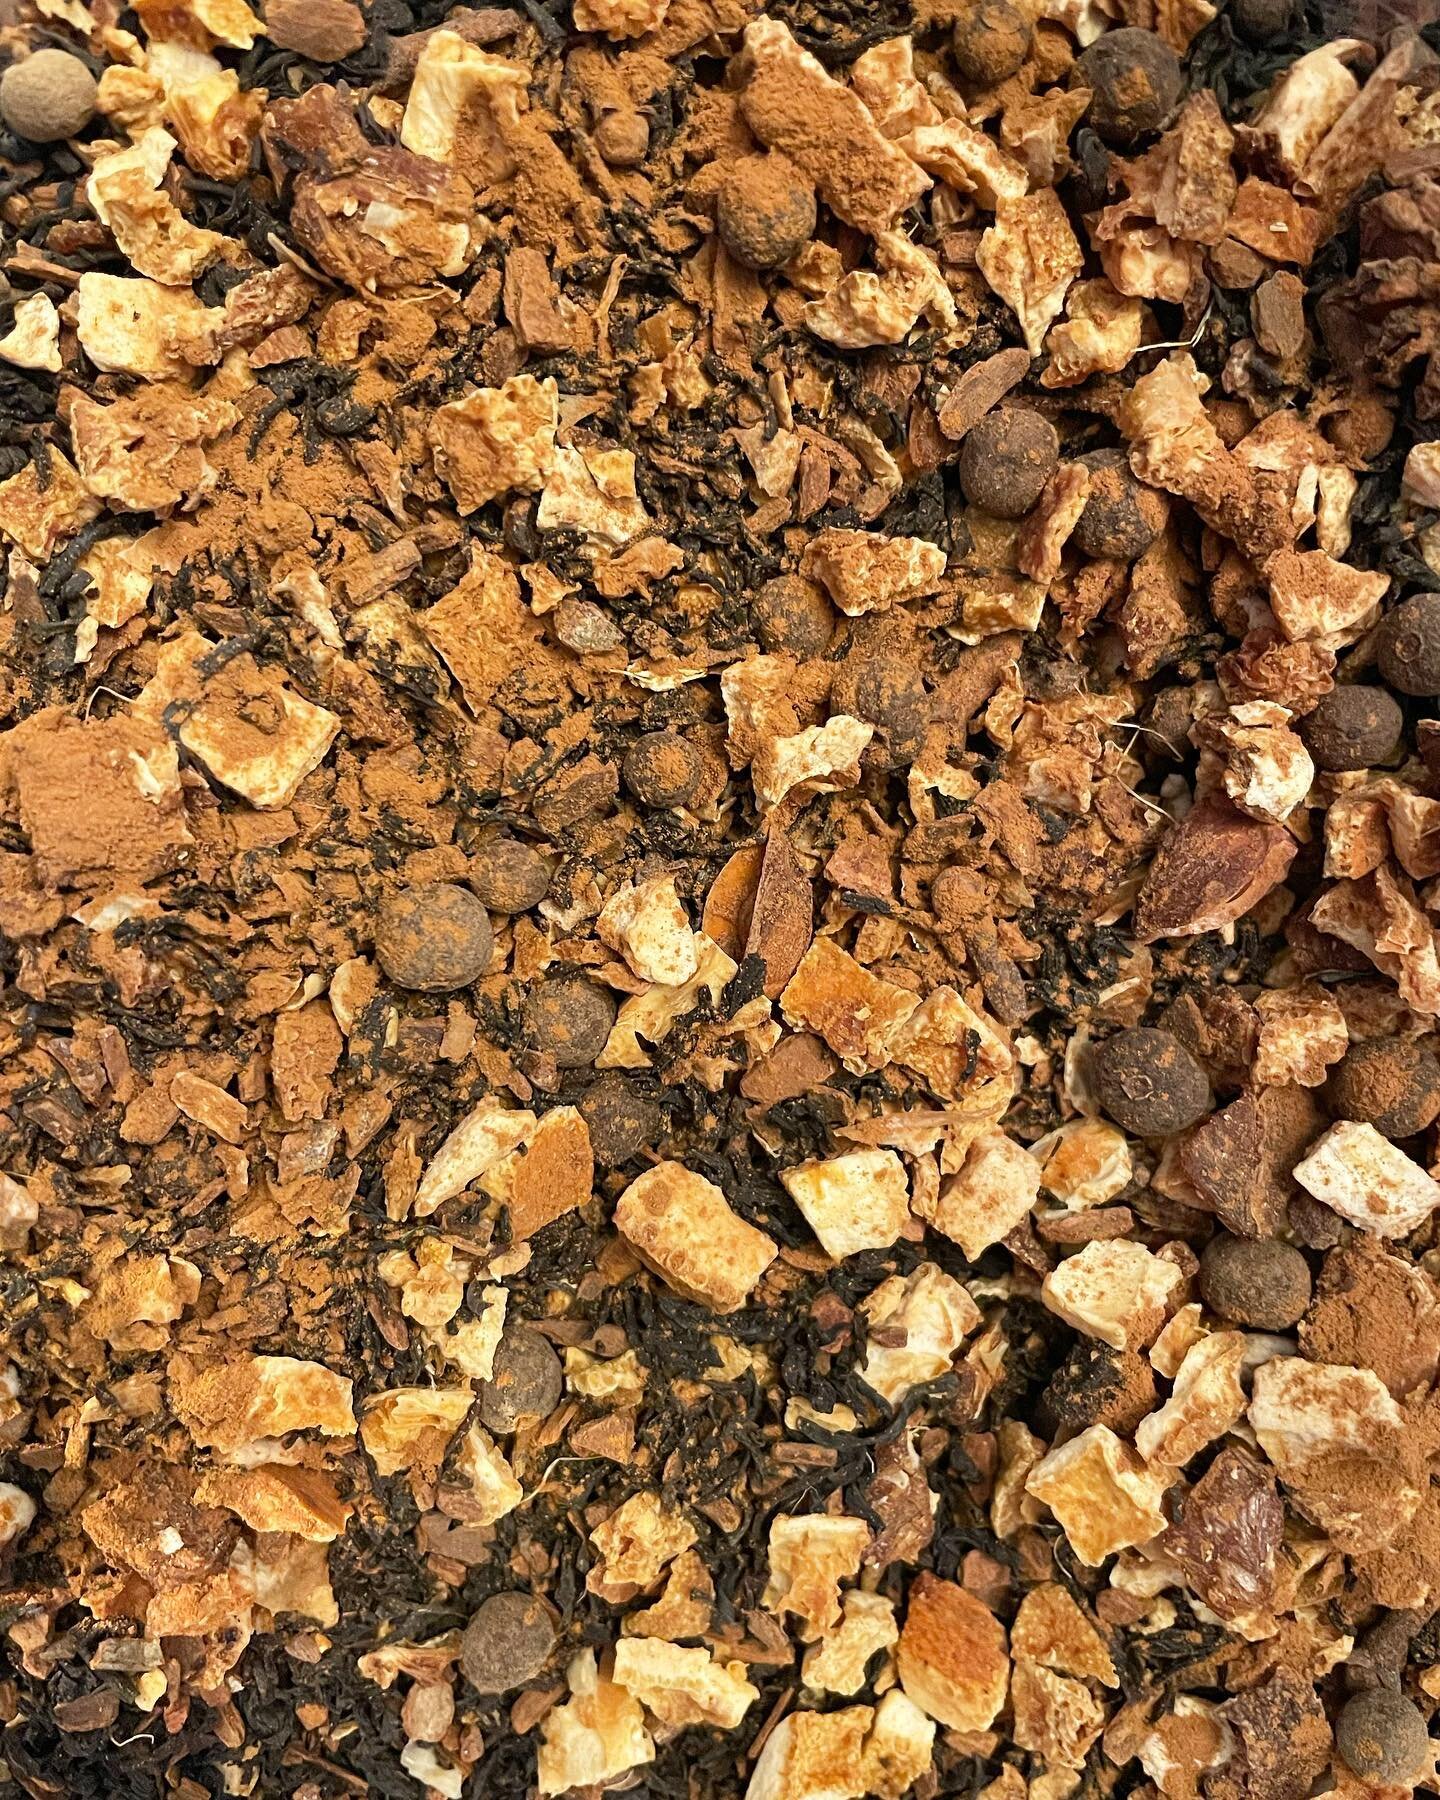 Warm up with a hot cup of our Black Spice blend! 🔥🖤 It&rsquo;s full of all the delicious ingredients that make you feel like you&rsquo;ve cozied up in a cabin by the fire - cassia cinnamon chips, oranges, allspice, orange peel, ginger, cloves, and 